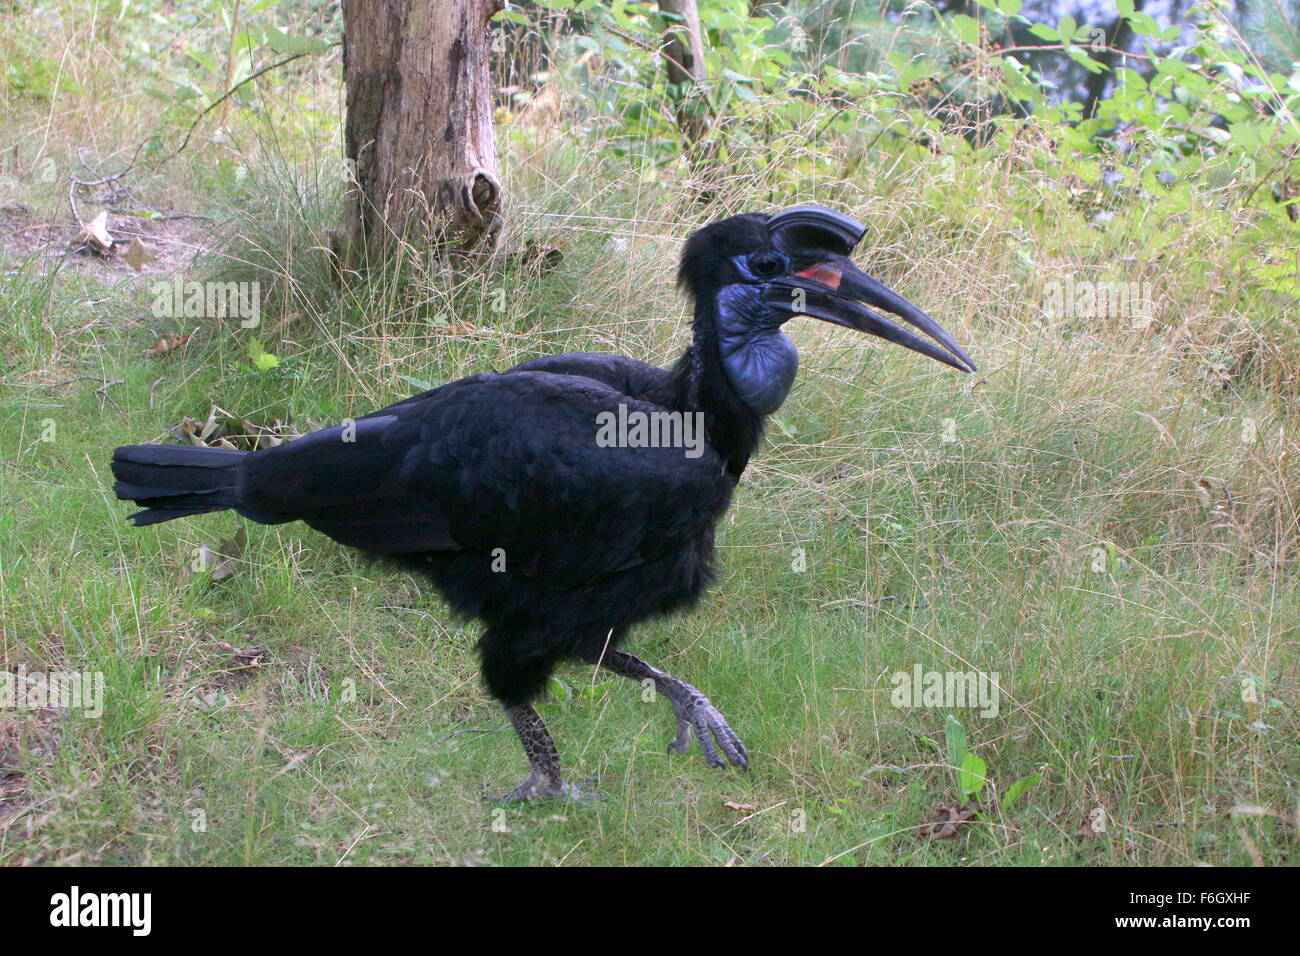 Female Abyssinian or Northern Ground hornbill (Bucorvus abyssinicus) walking in the grass Stock Photo